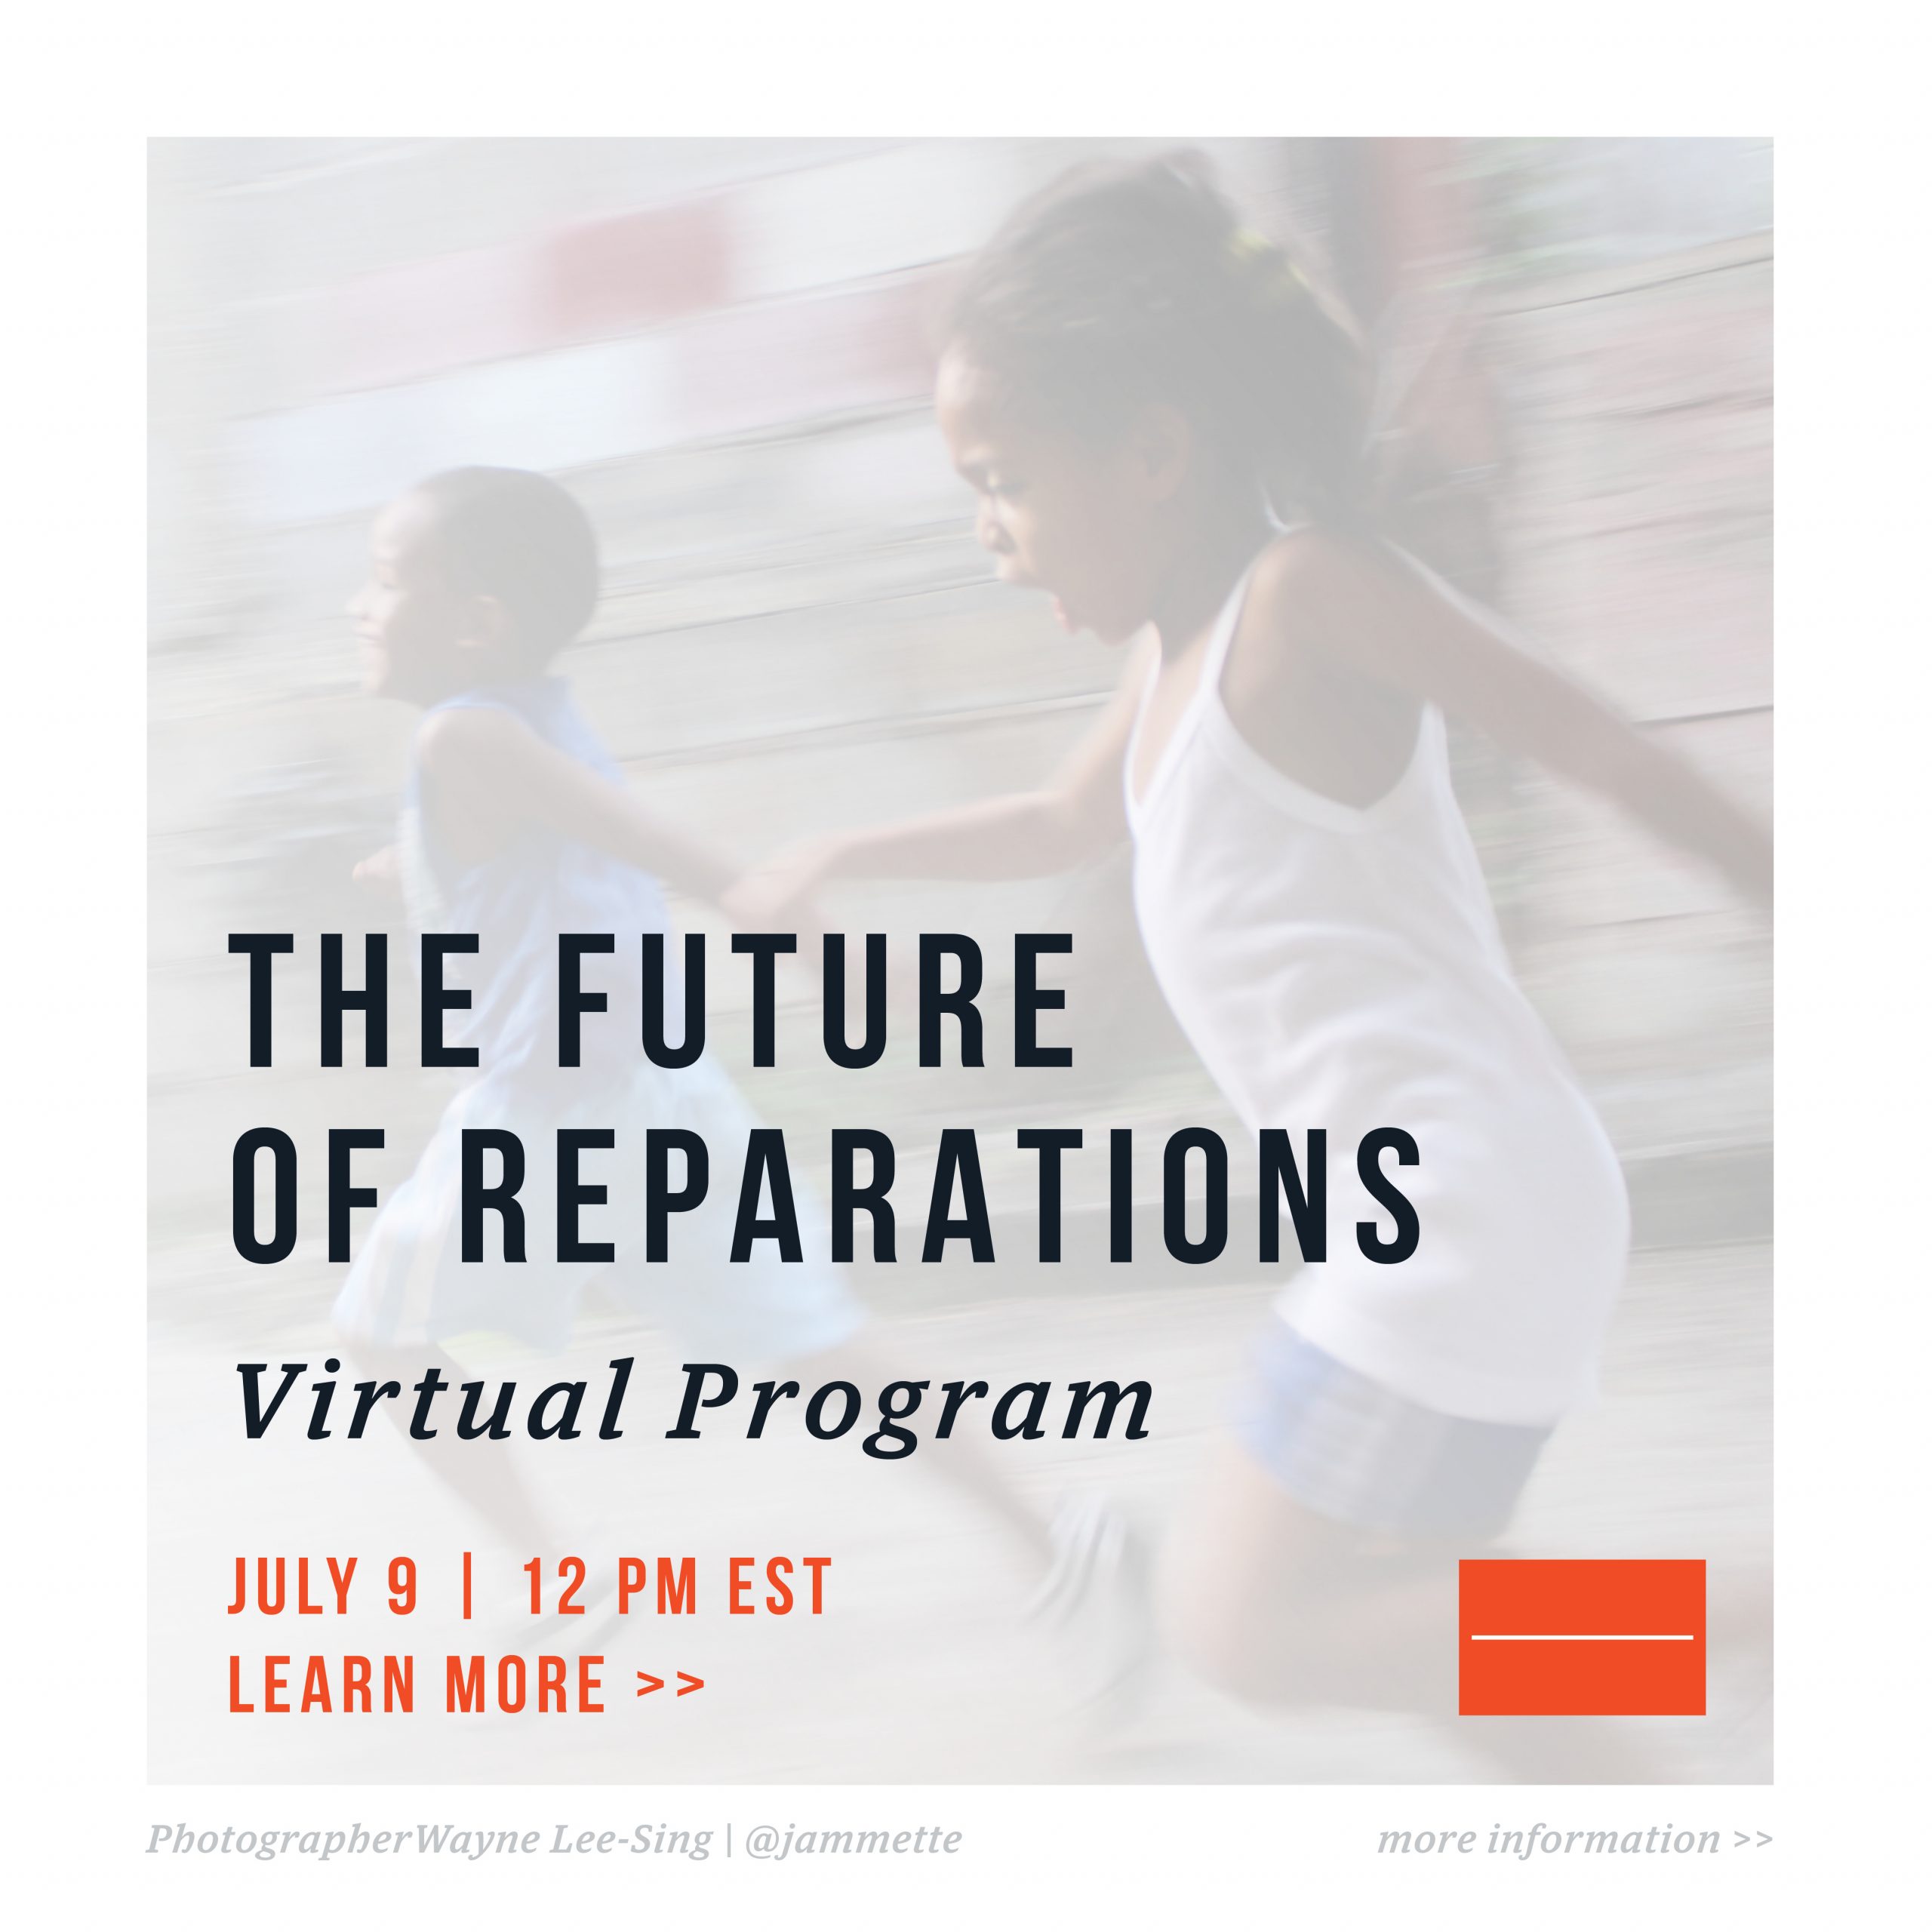 The Future of Reparations